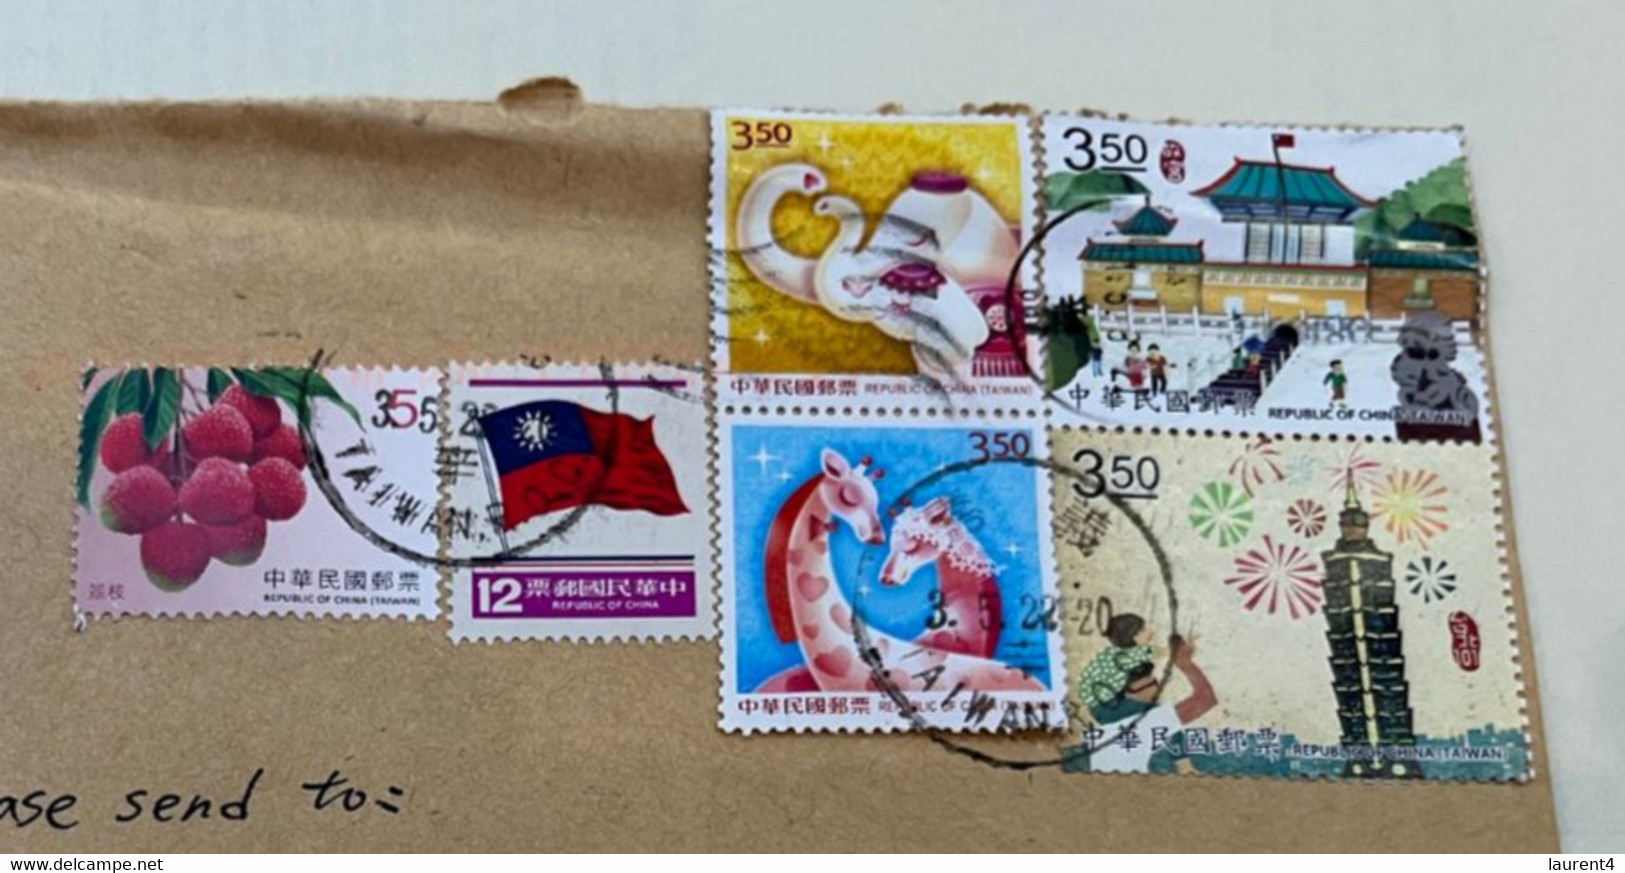 (1 L 7) Letter Posted From Taiwan To Australia (during COVID-19 Pandemic Crisis) 6 Stamps - 18 13,5 Cm - Covers & Documents